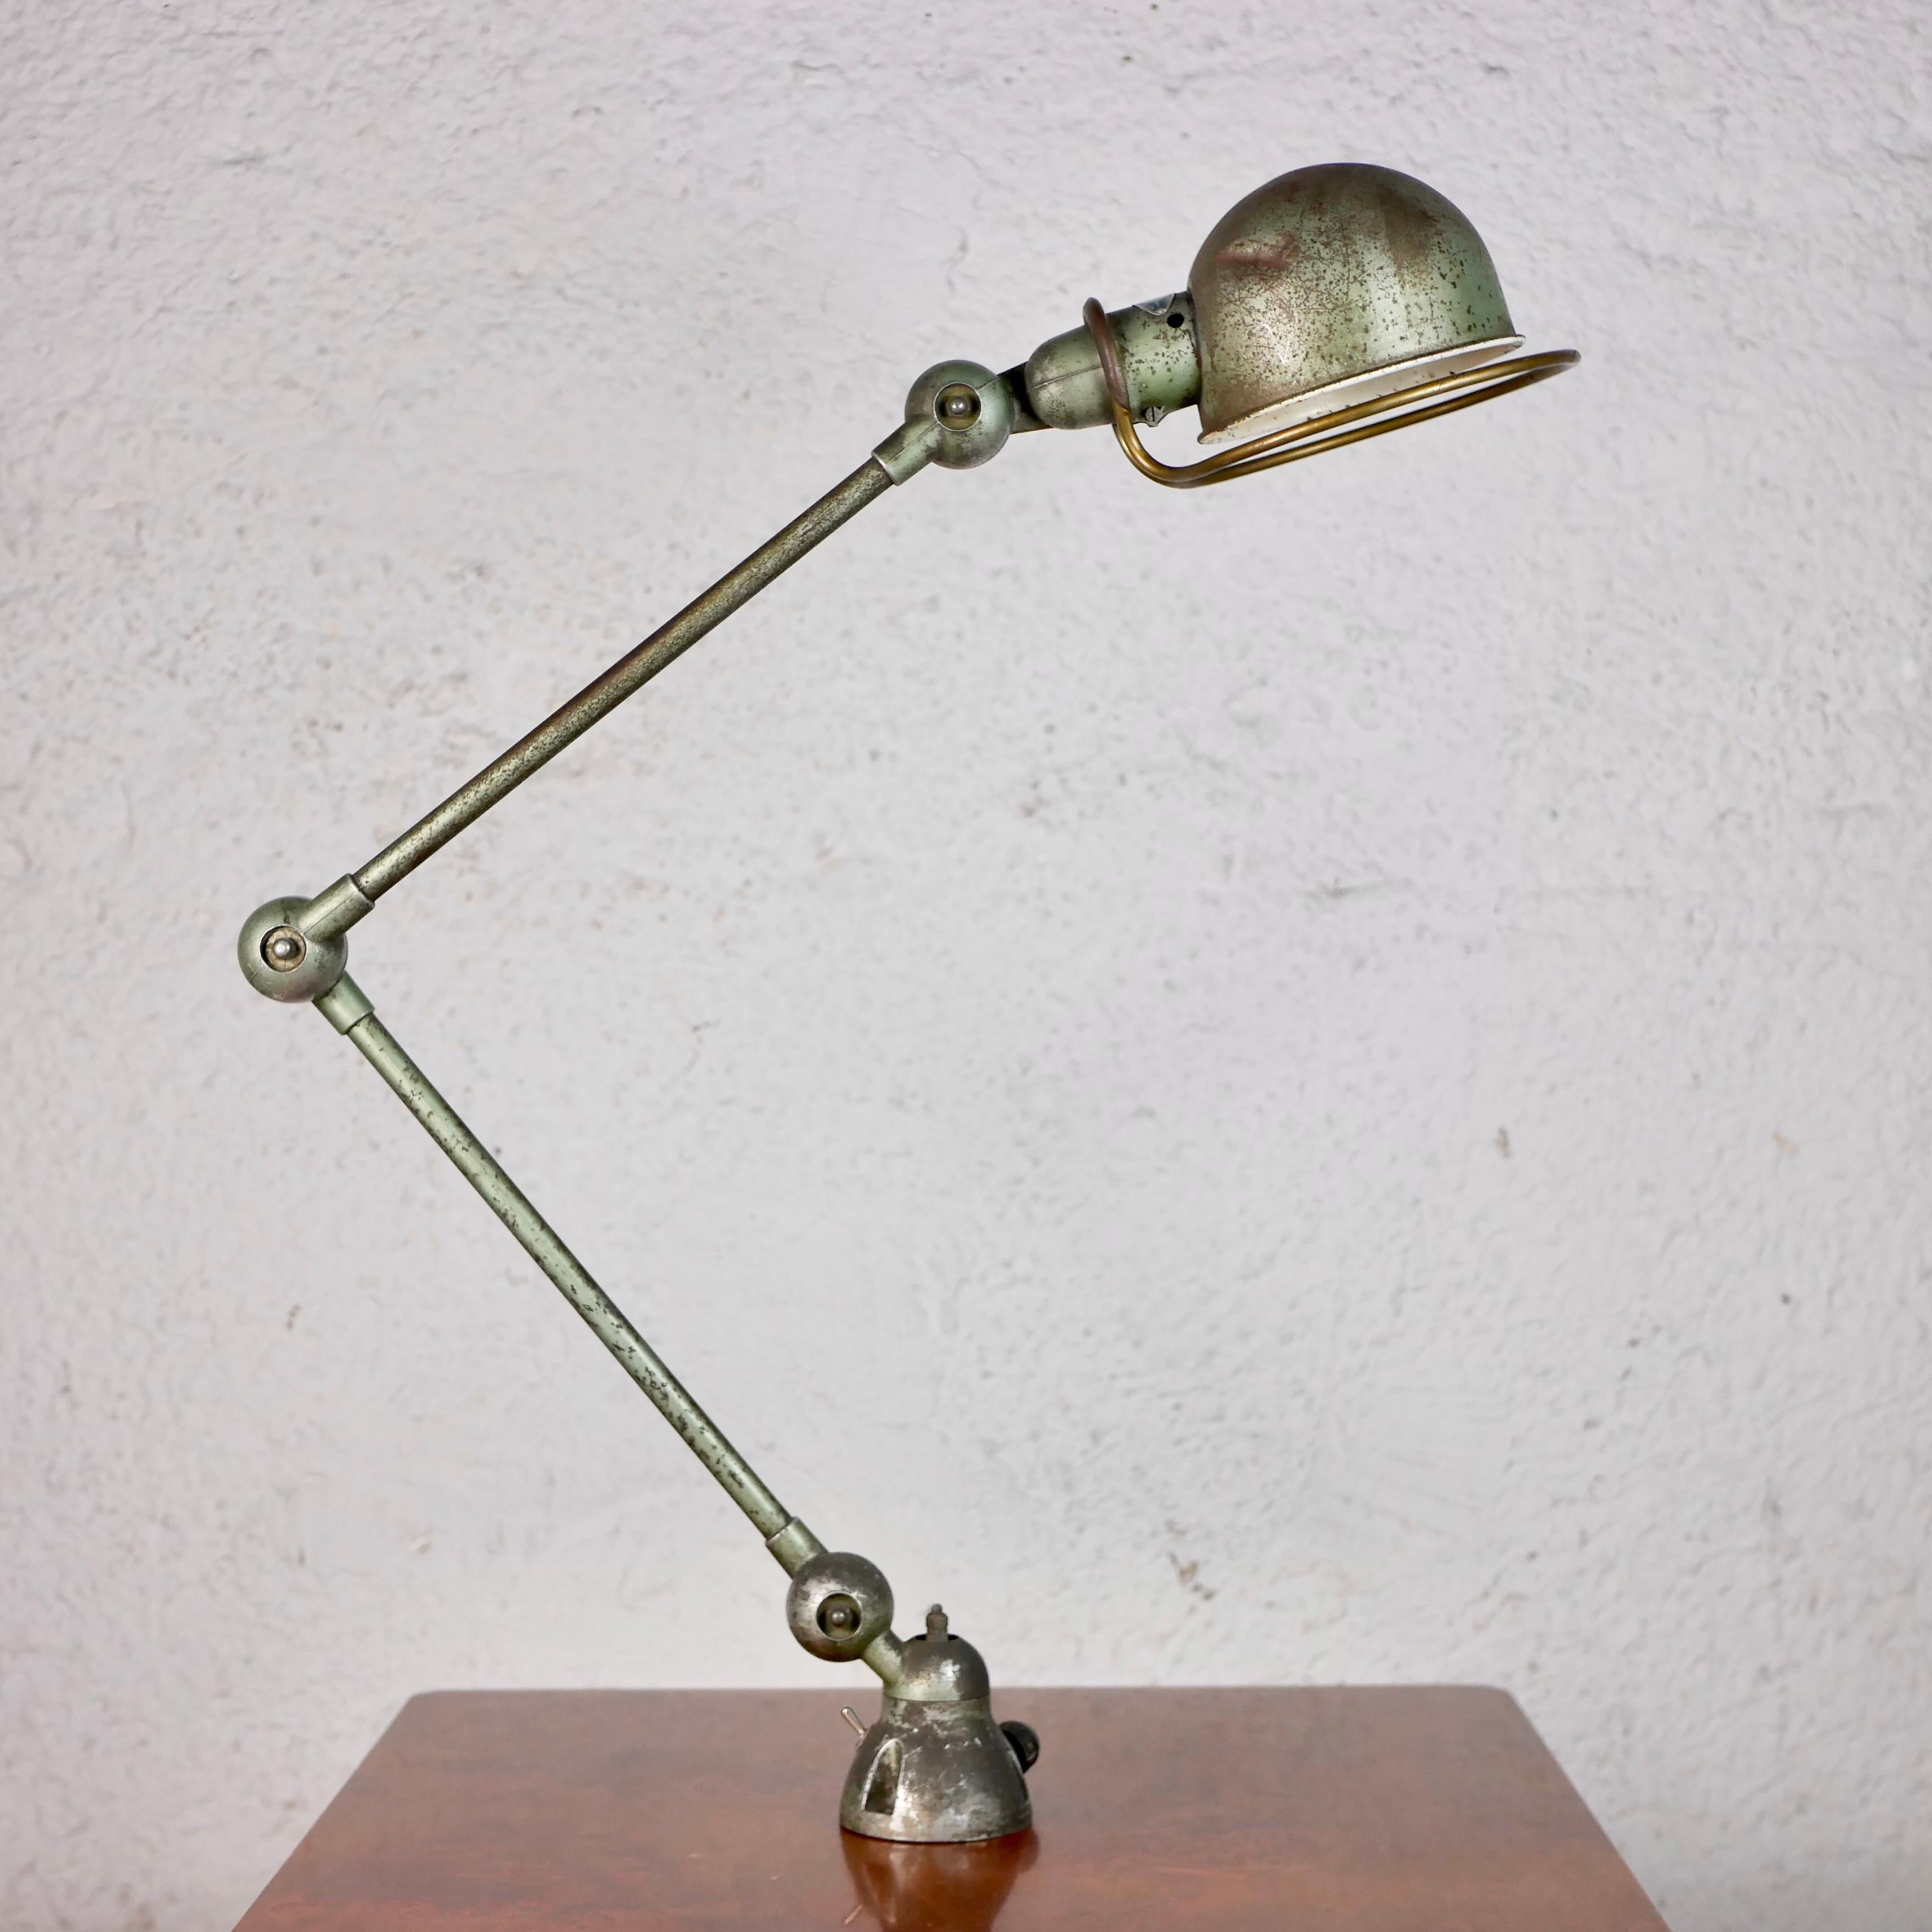 Famous Jieldé lamp in vespa green, designed by Jean-Louis Domecq (JLD) in the 1950s in Lyon, France. 
Very nice patina, high quality made, can be fixed to a desk or to the wall.
Very sturdy.
With its riveted label.
We particularly like the brass